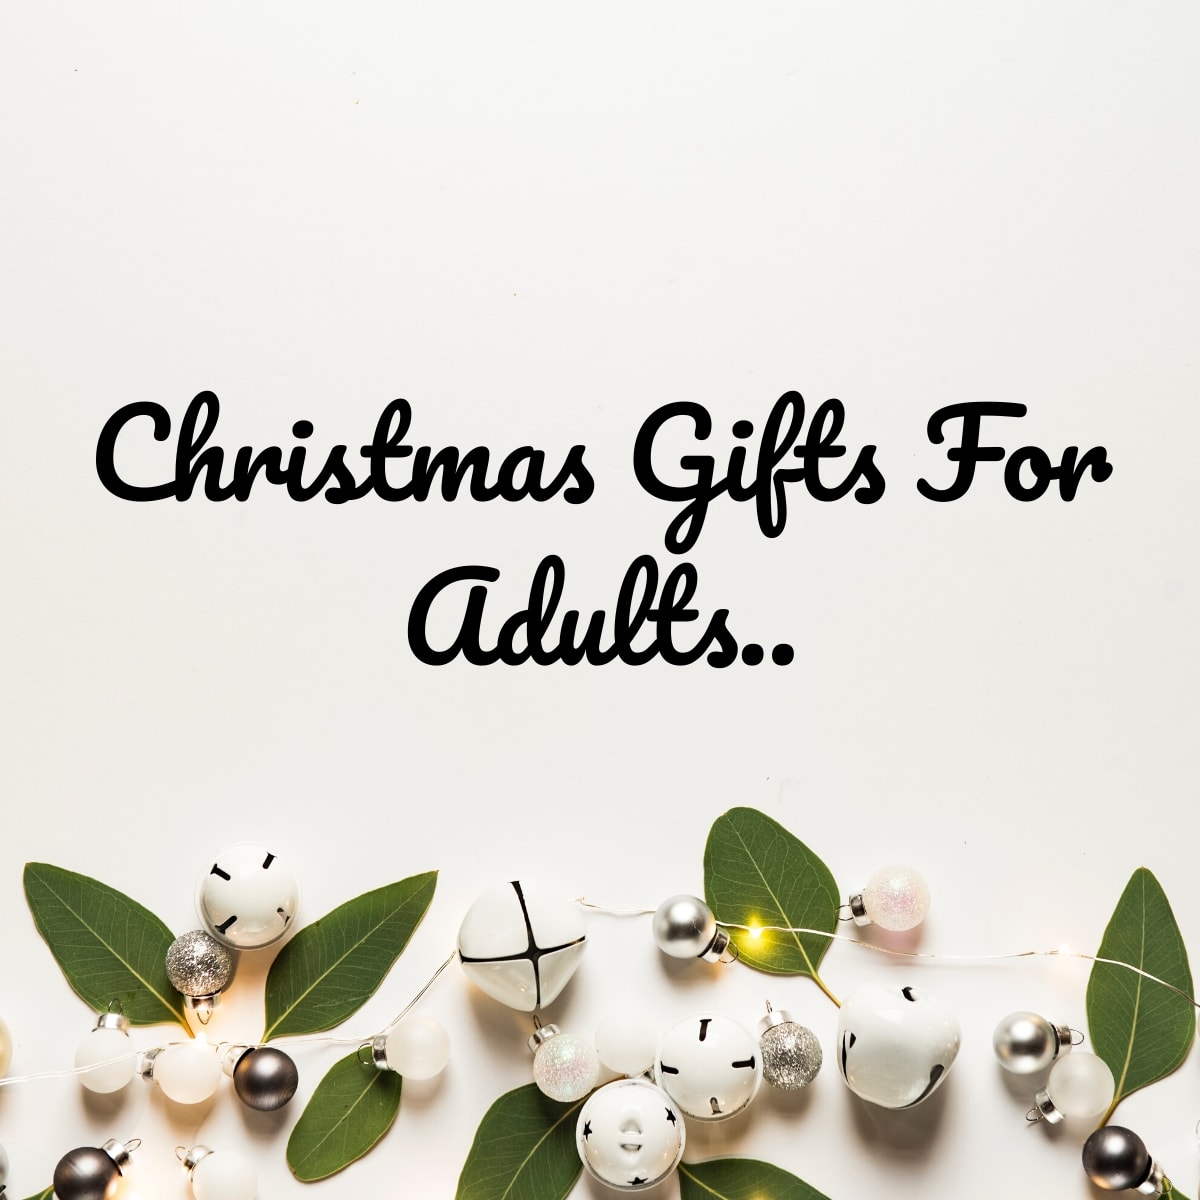 Christmas Gifts For Adults 2020